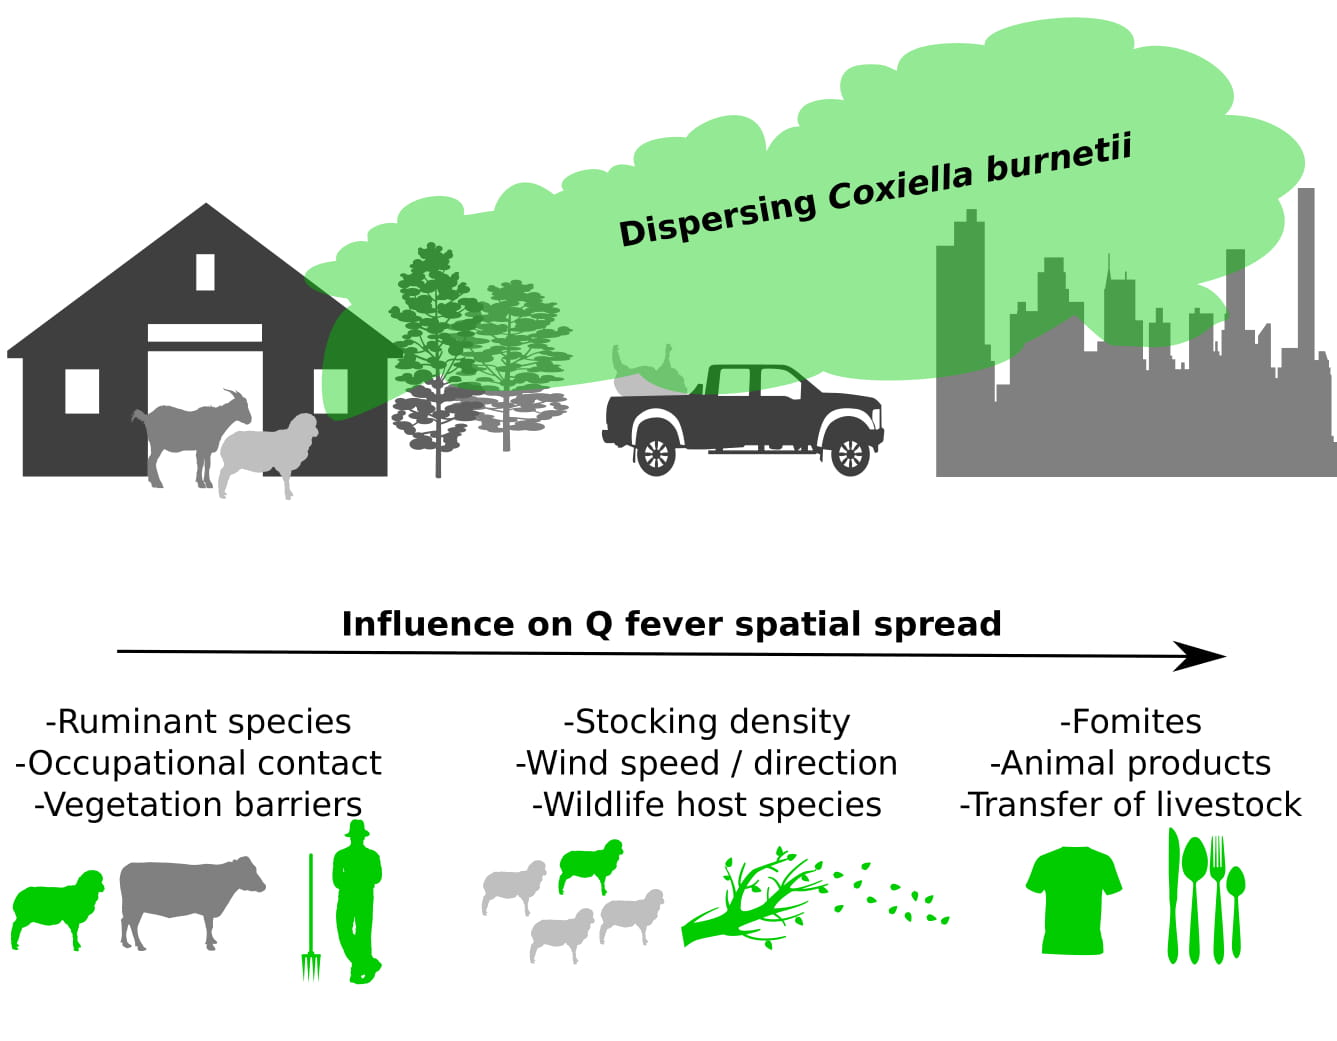 Q fever is a zoonotic bacterial disease caused by Coxiella burnetii. The Spatial Epidemiology Lab (SpatialEpi) is a medical geography and disease ecology research group based at the University of Queensland that is involved in biosecurity management of Q fever risk in Australia.